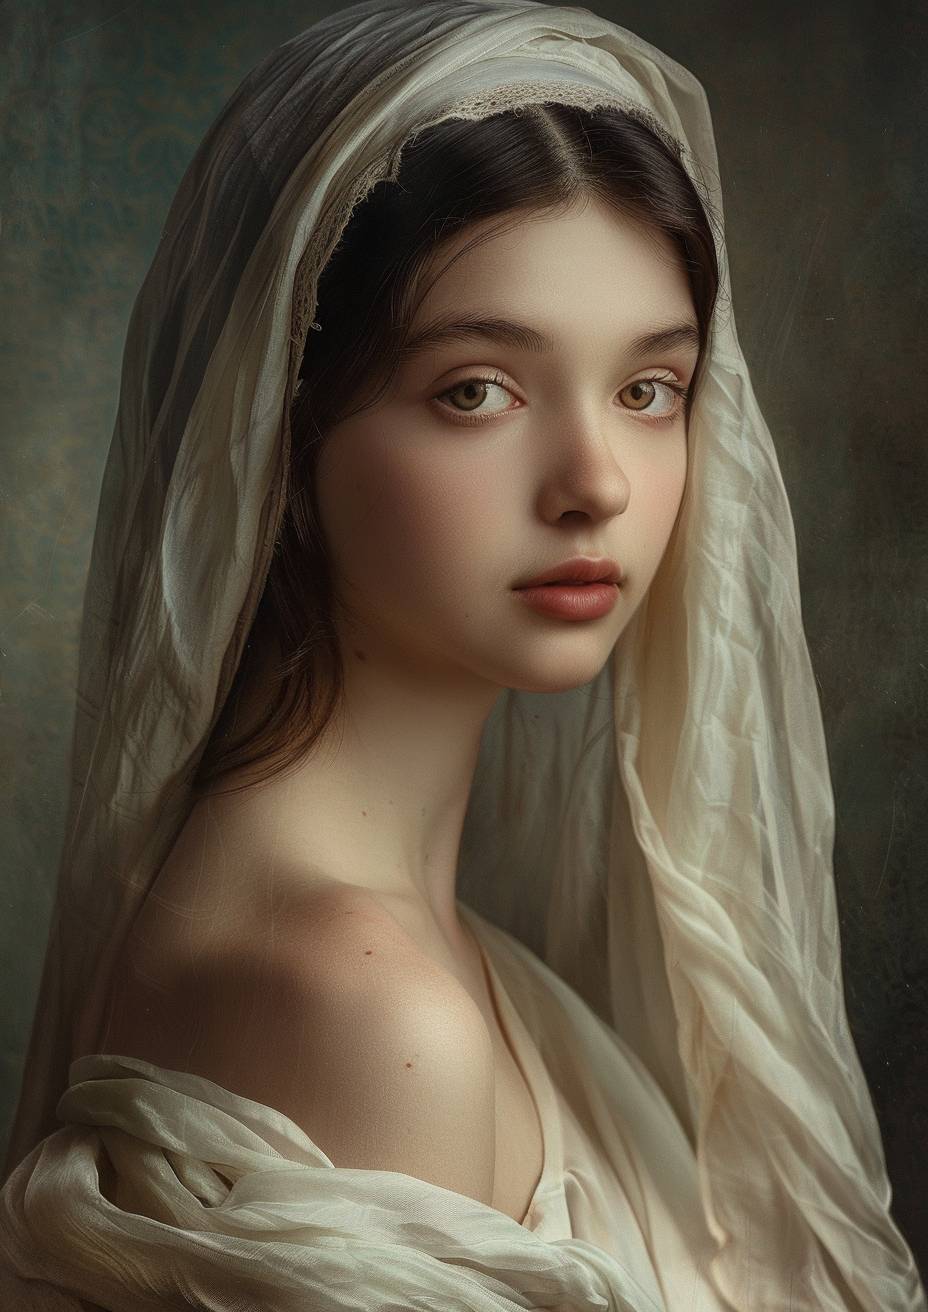 A young woman with ethereal beauty reminiscent of a young Felix Luna, captured in the timeless style of Giorgione, with soft lighting enhancing her delicate features, a subtle smile playing on her lips, draped in luxurious fabrics that cascade elegantly around her in a scene that exudes classical serenity and grace.